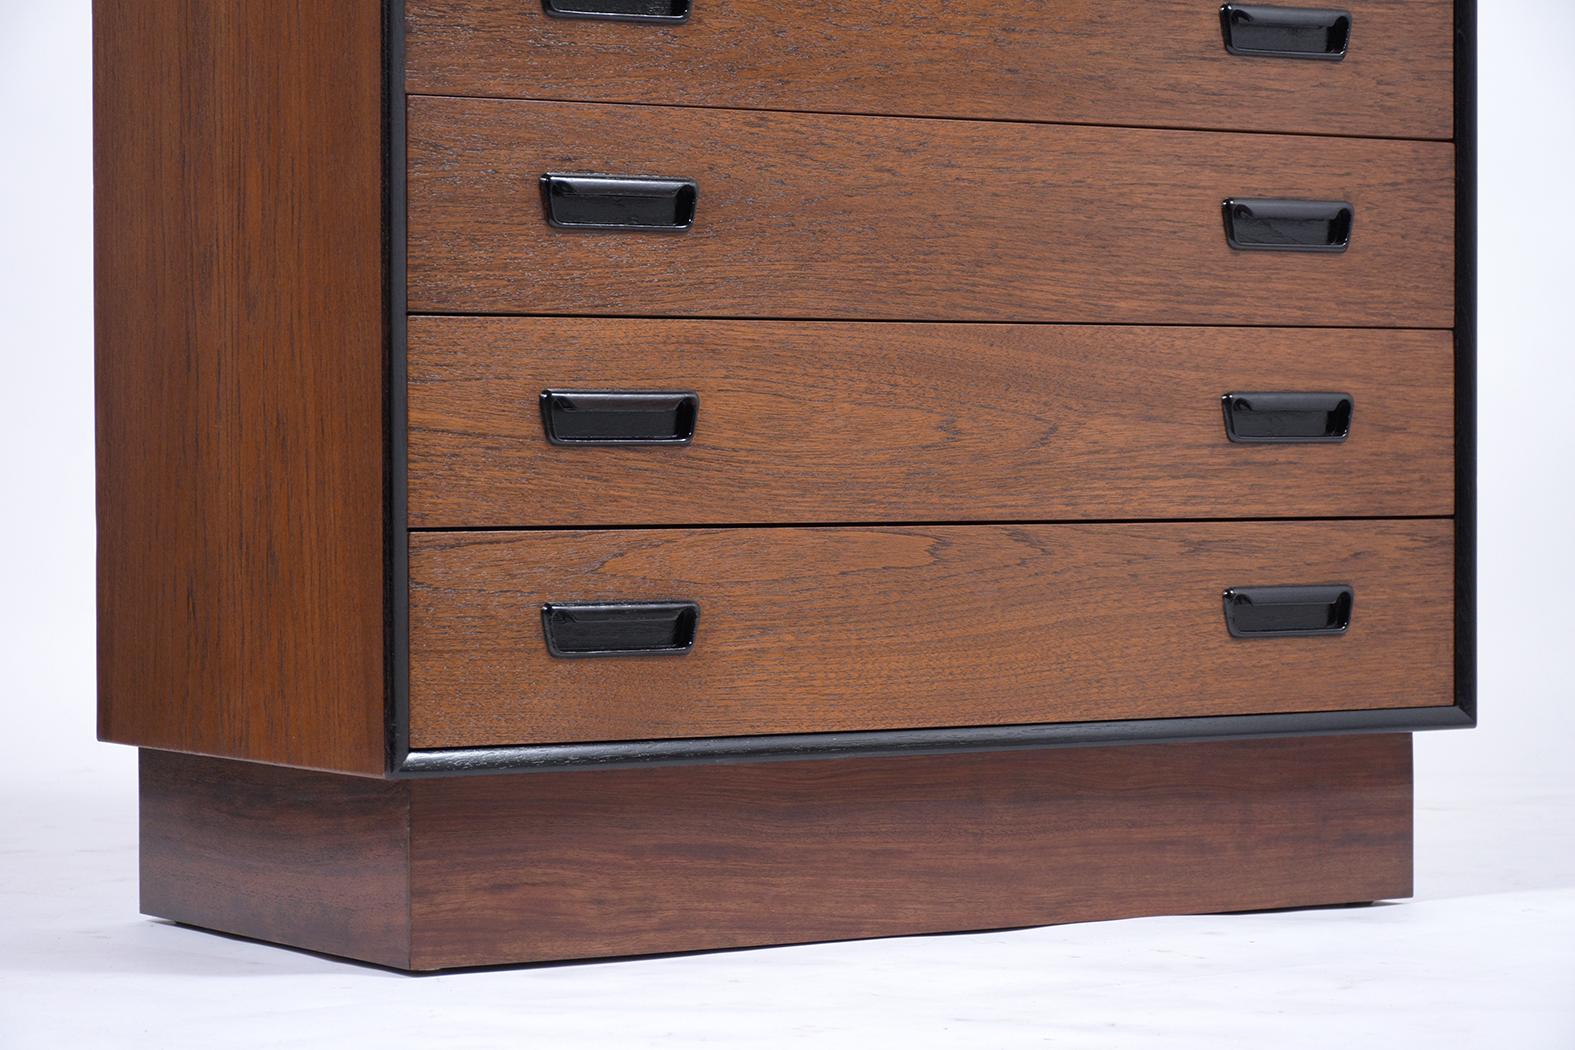 1960s Mid-Century Modern Danish Teak Wood Chest of Drawers with Ebonized Accents For Sale 2